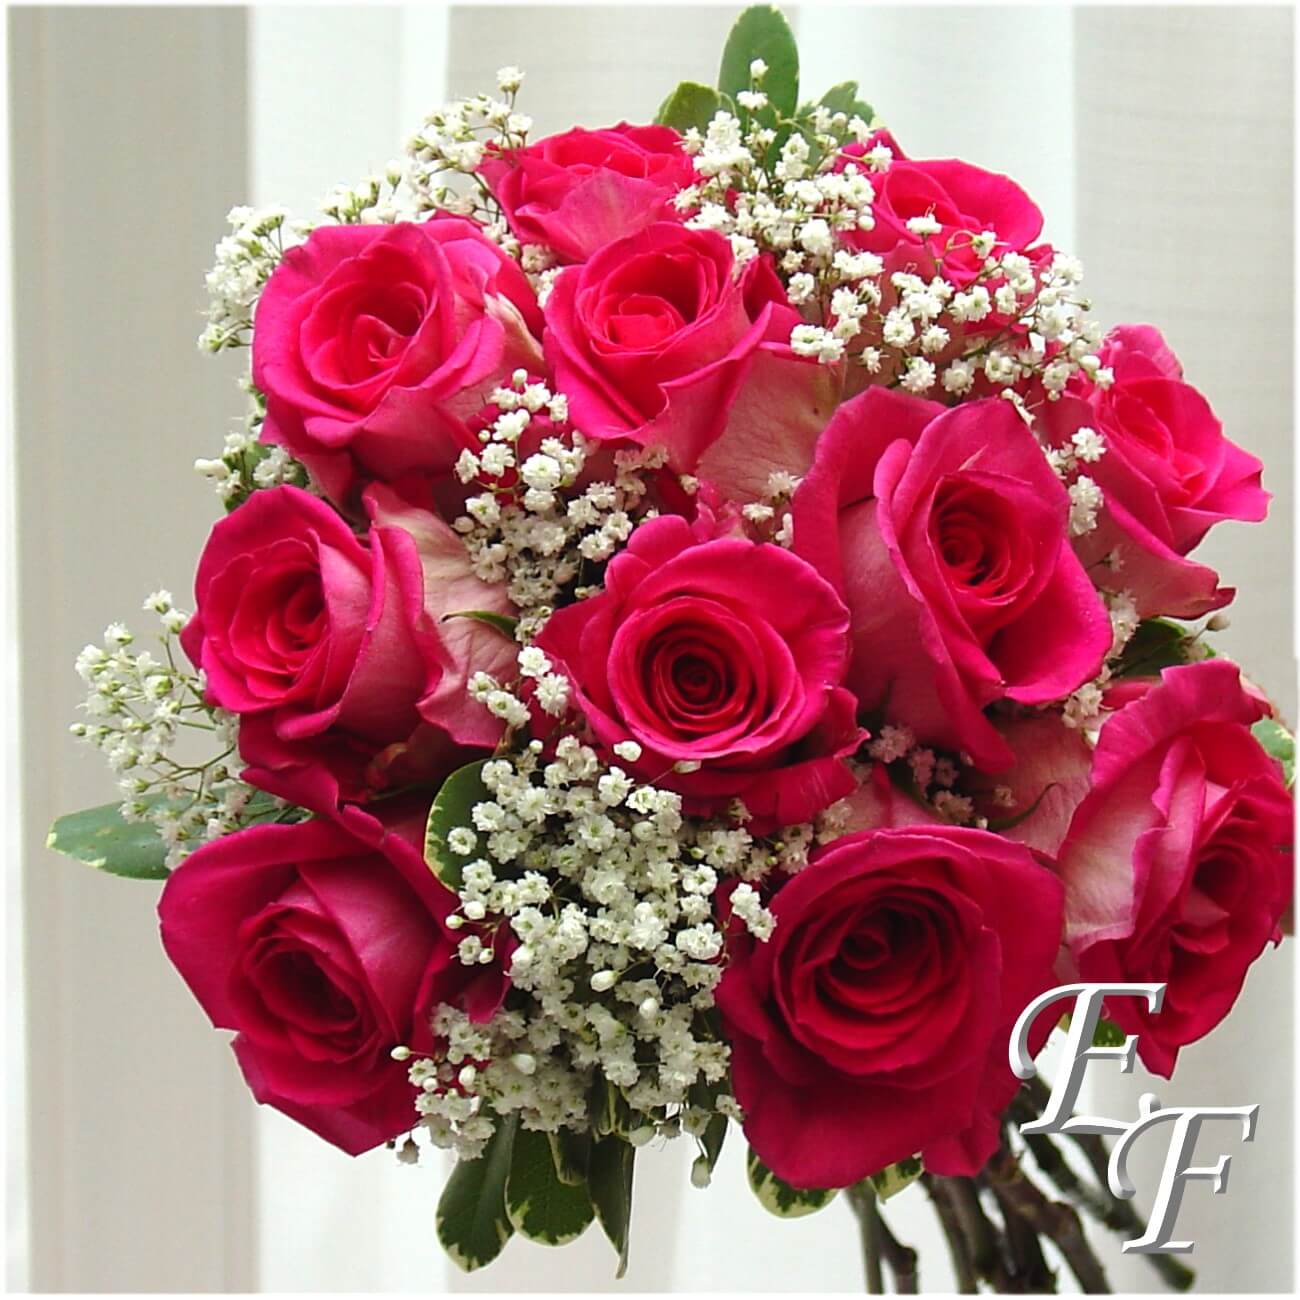 red and pink rose wedding bouquet